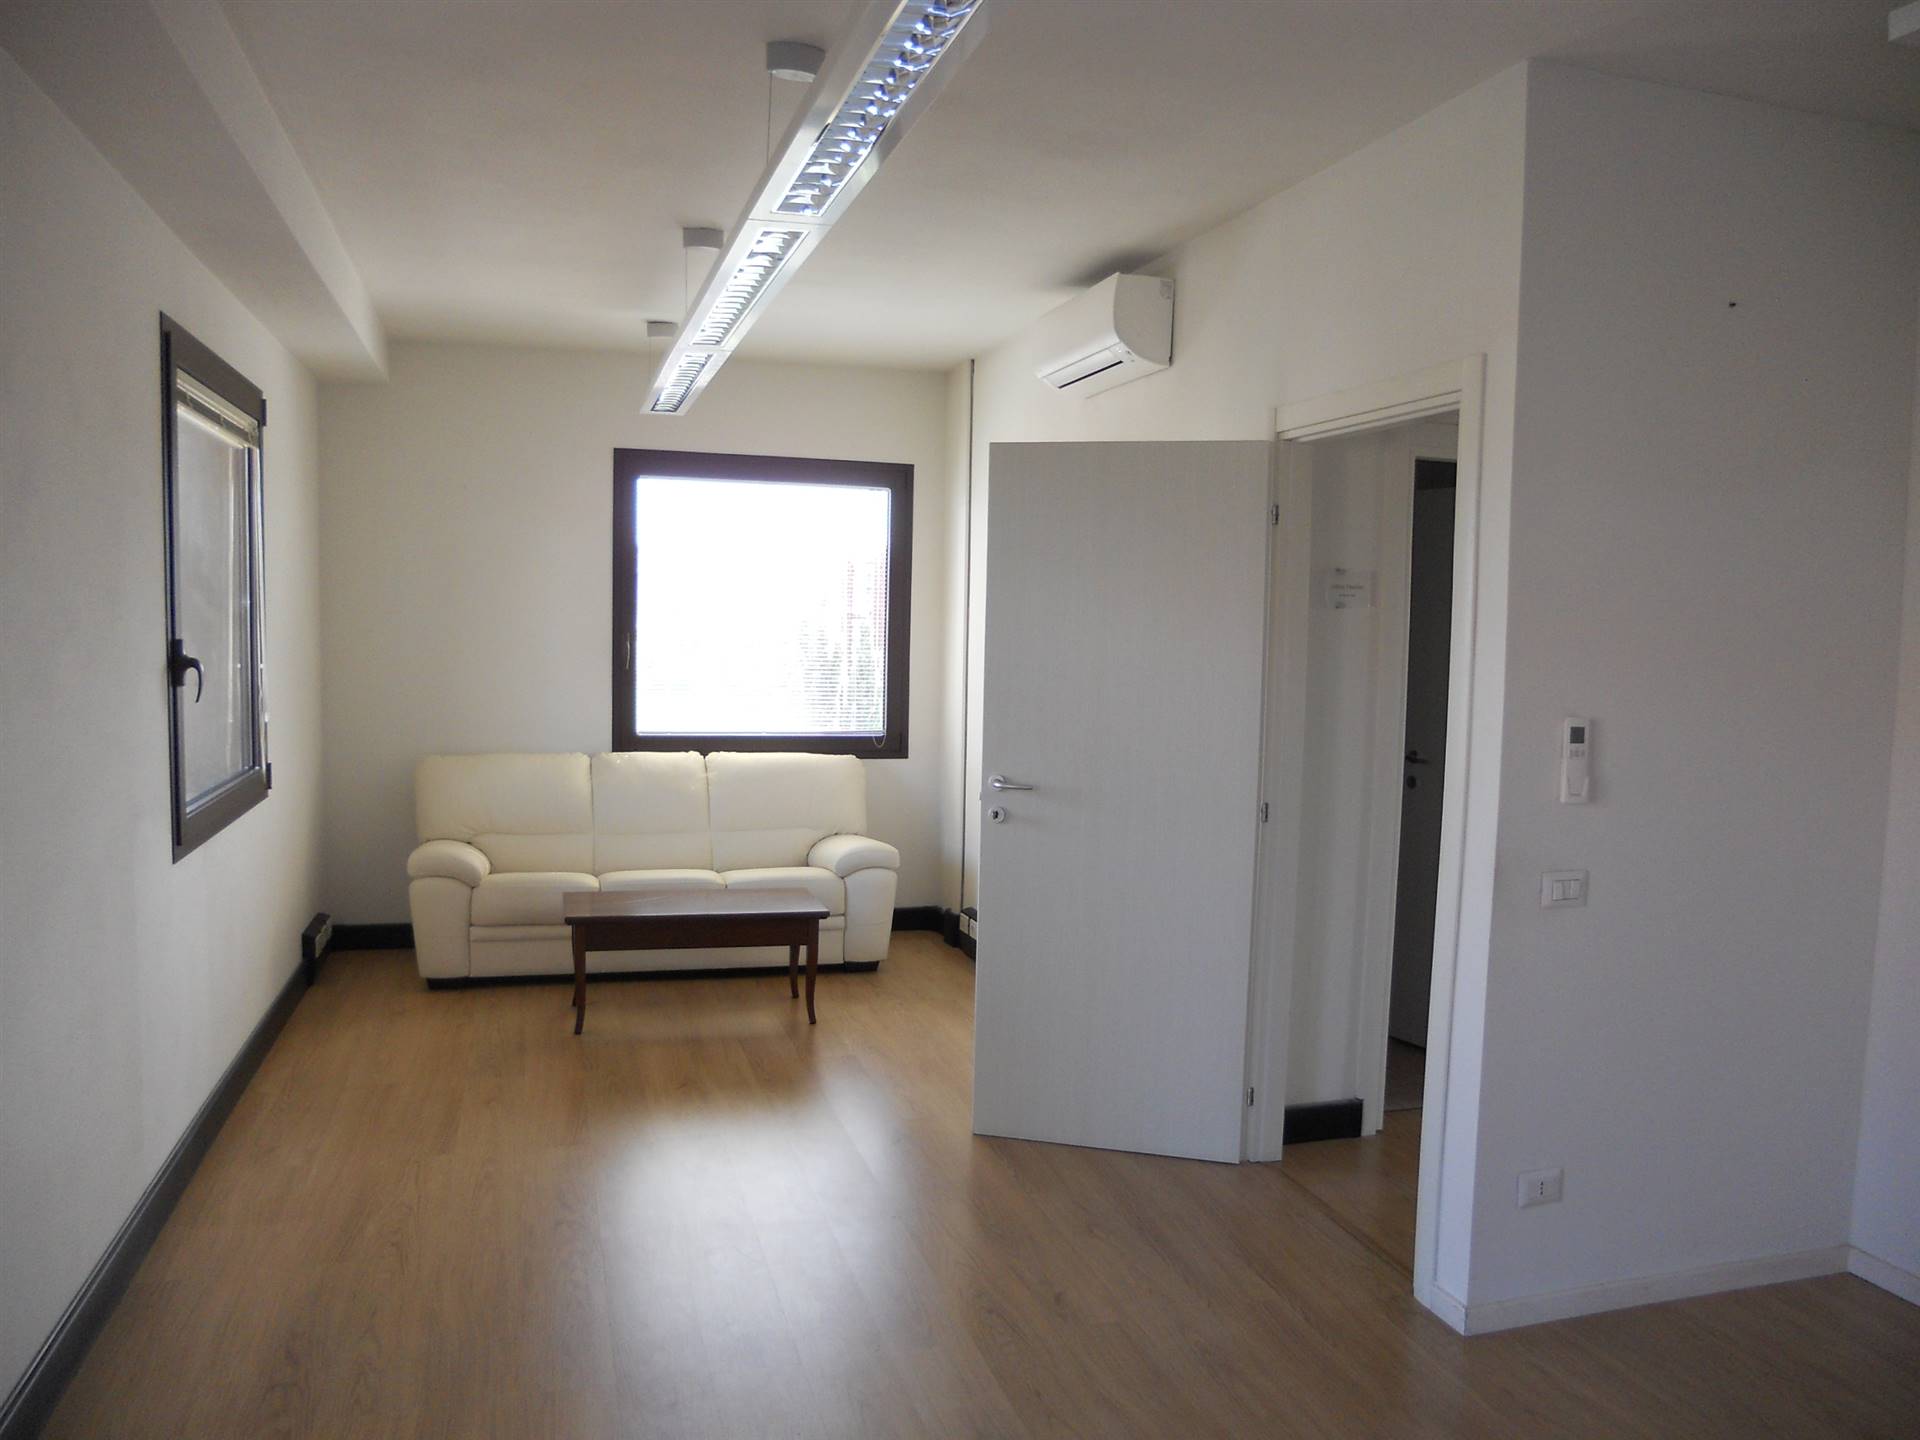 COLLI ALTI, SIGNA, Office for rent of 250 Sq. mt., Excellent Condition, Heating Individual heating system, Energetic class: G, placed at 2° on 2, 